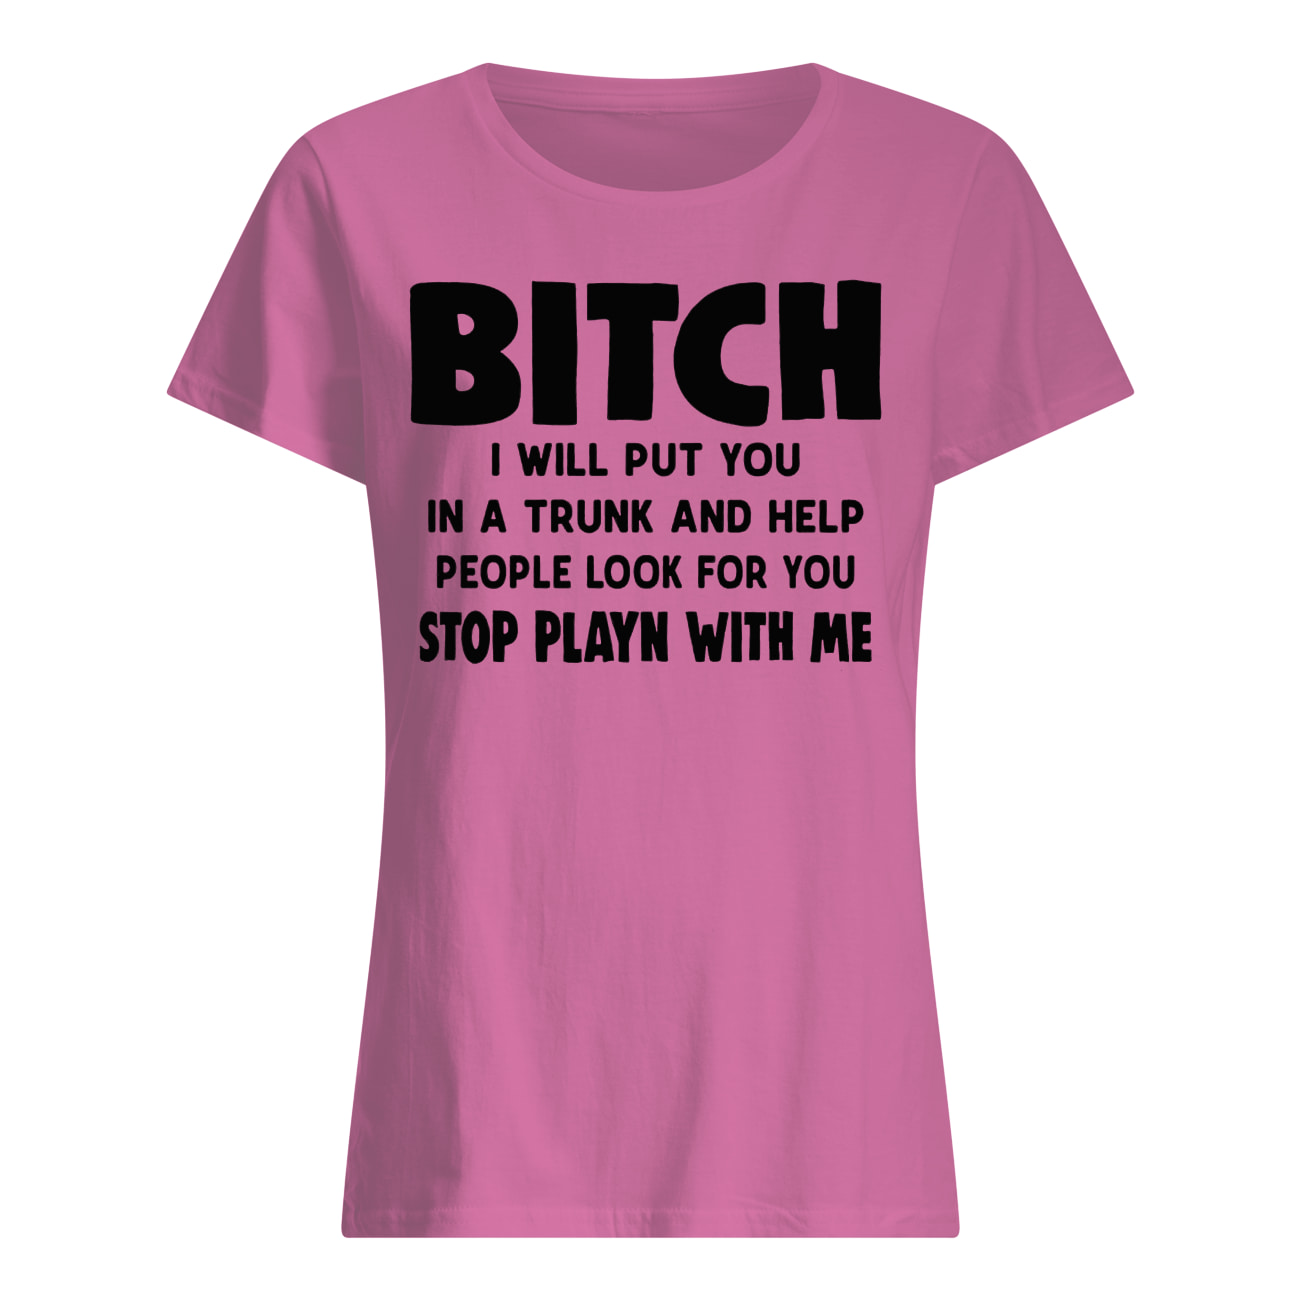 Bitch I will put you in the trunk and help people look for you stop playing with me women's shirt